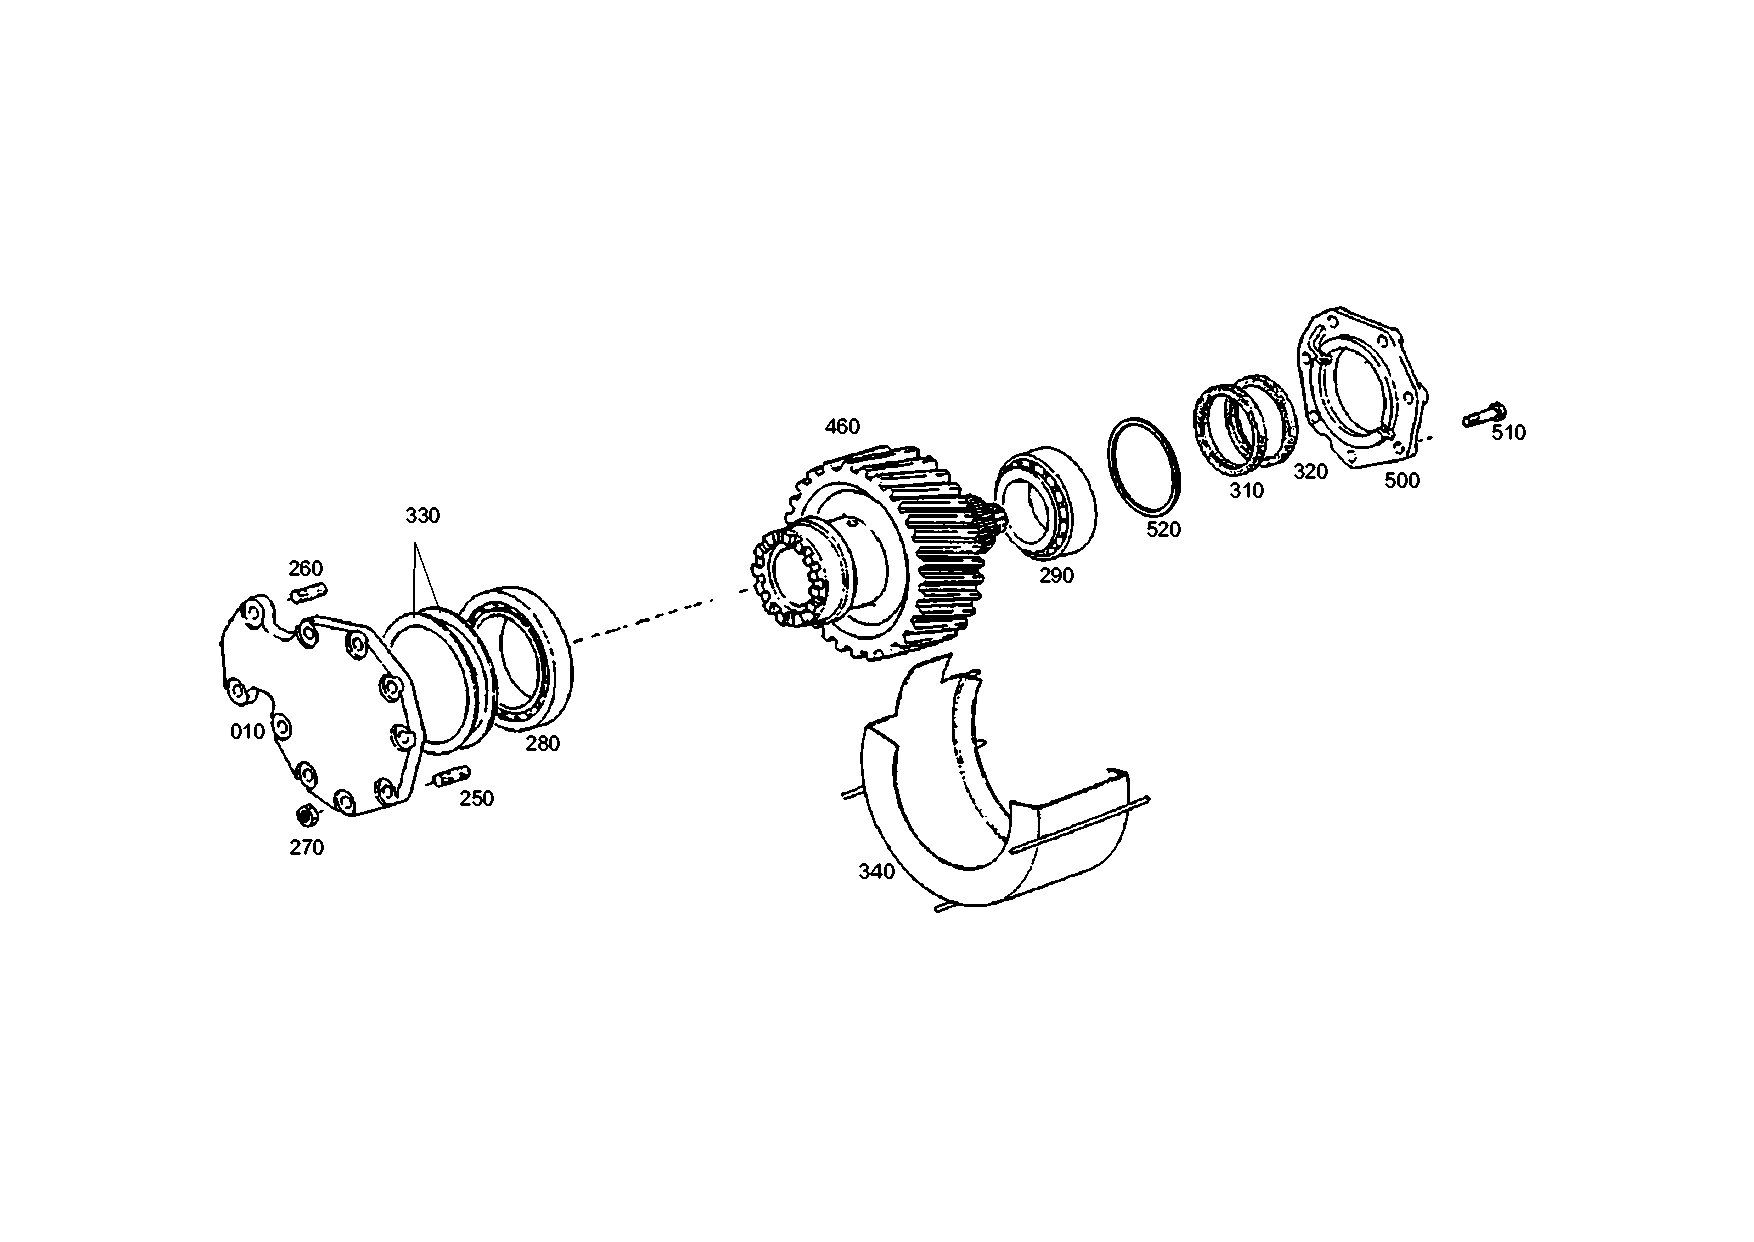 drawing for JOHN DEERE TTZF200848 - BEARING COVER (figure 4)